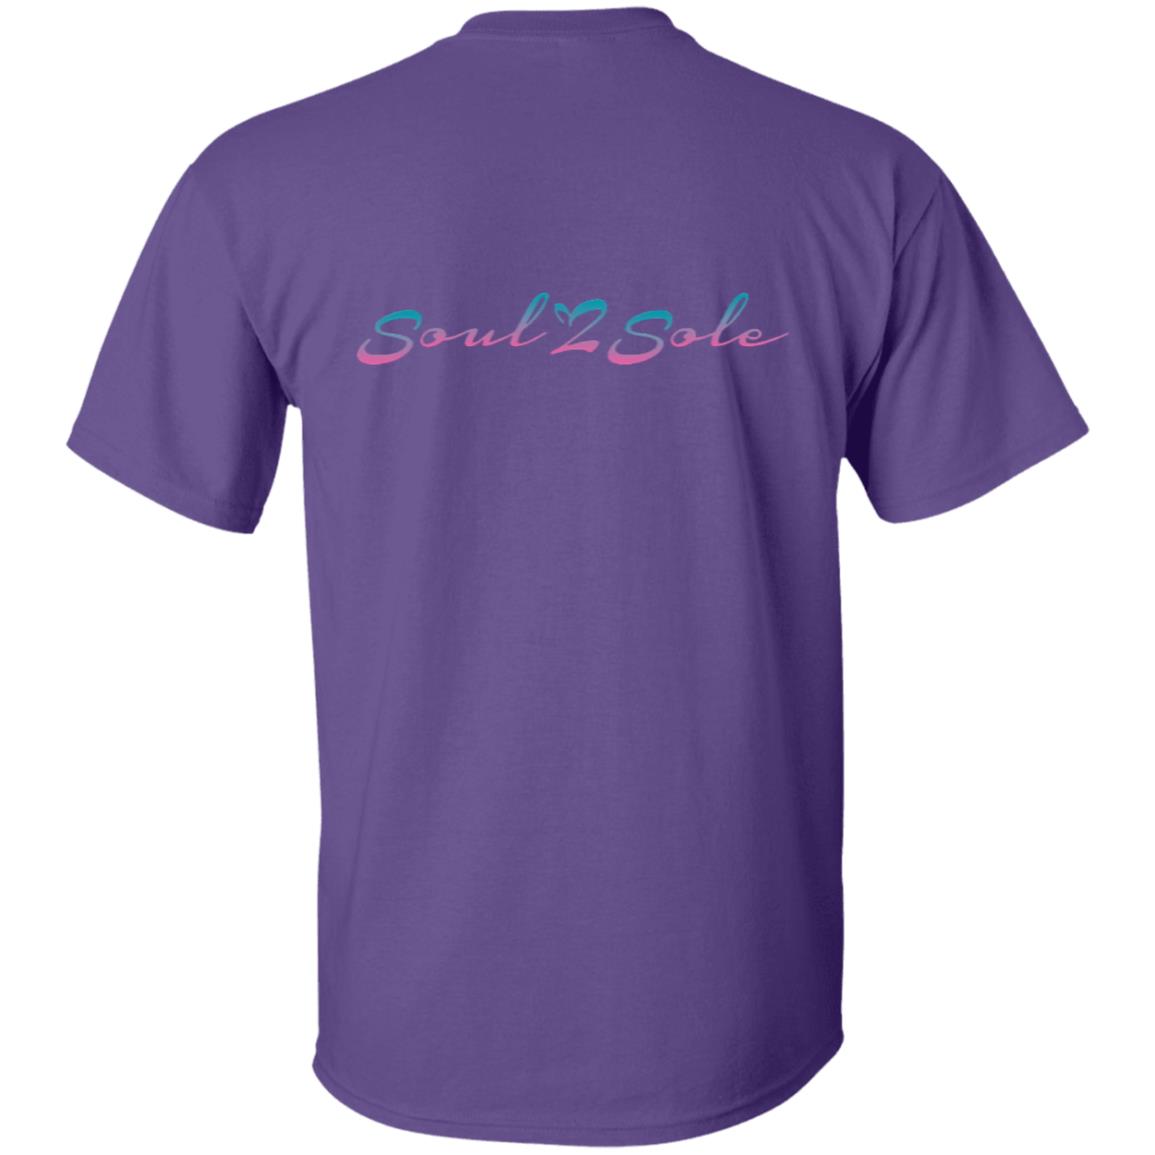 PERSONALIZED - S2S 100% Cotton T-Shirt